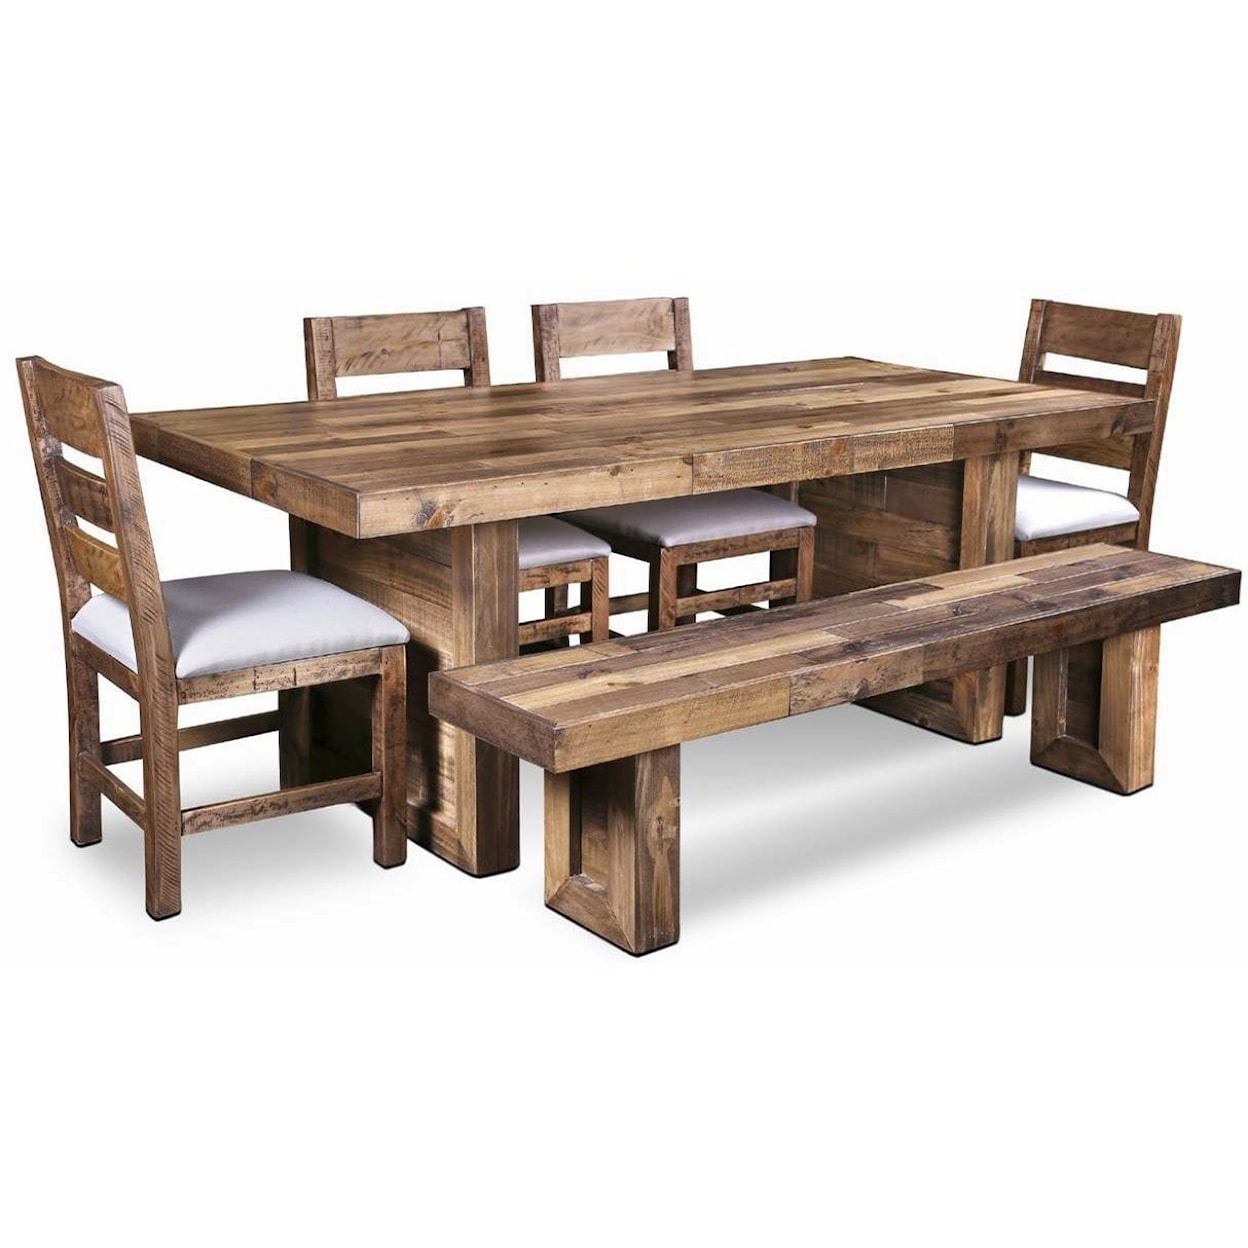 Horizon Home Boardwalk 82" Table Set with Bench